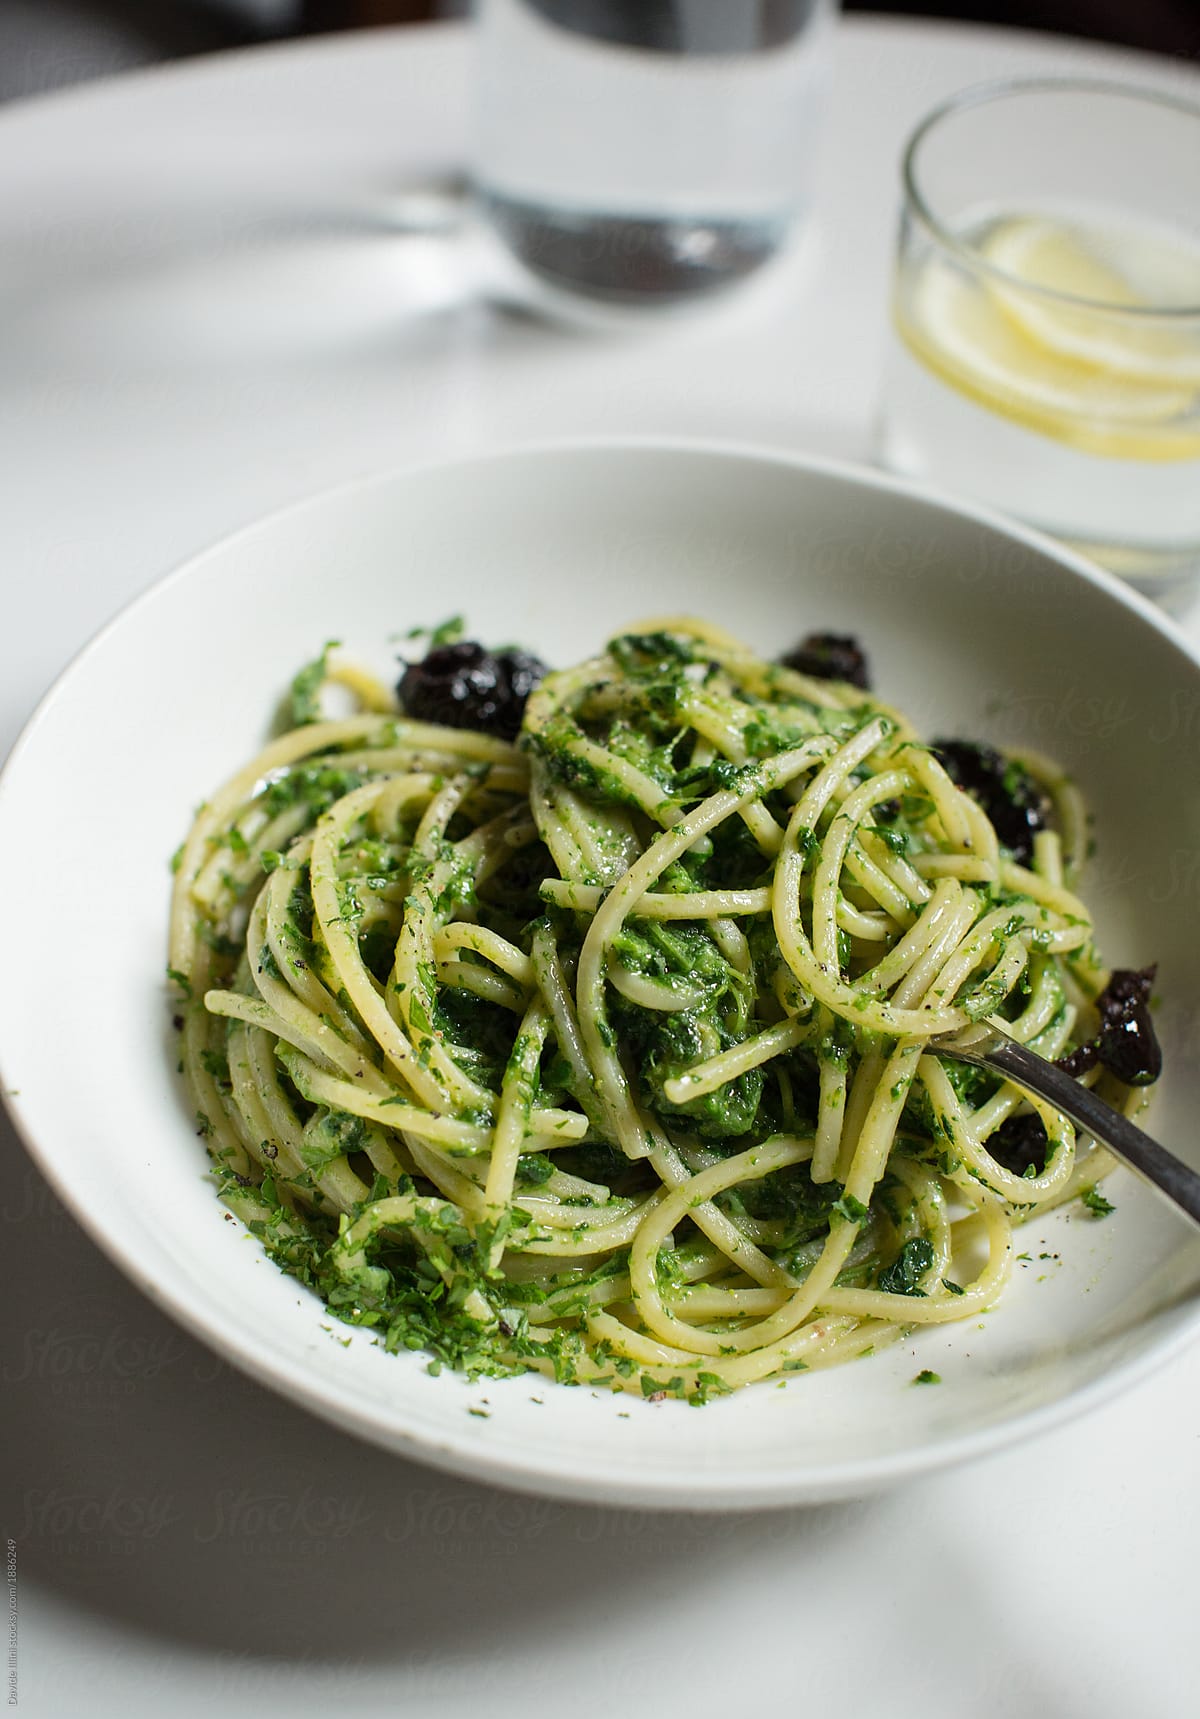 Spaghetti with broccoli sauce and black olives